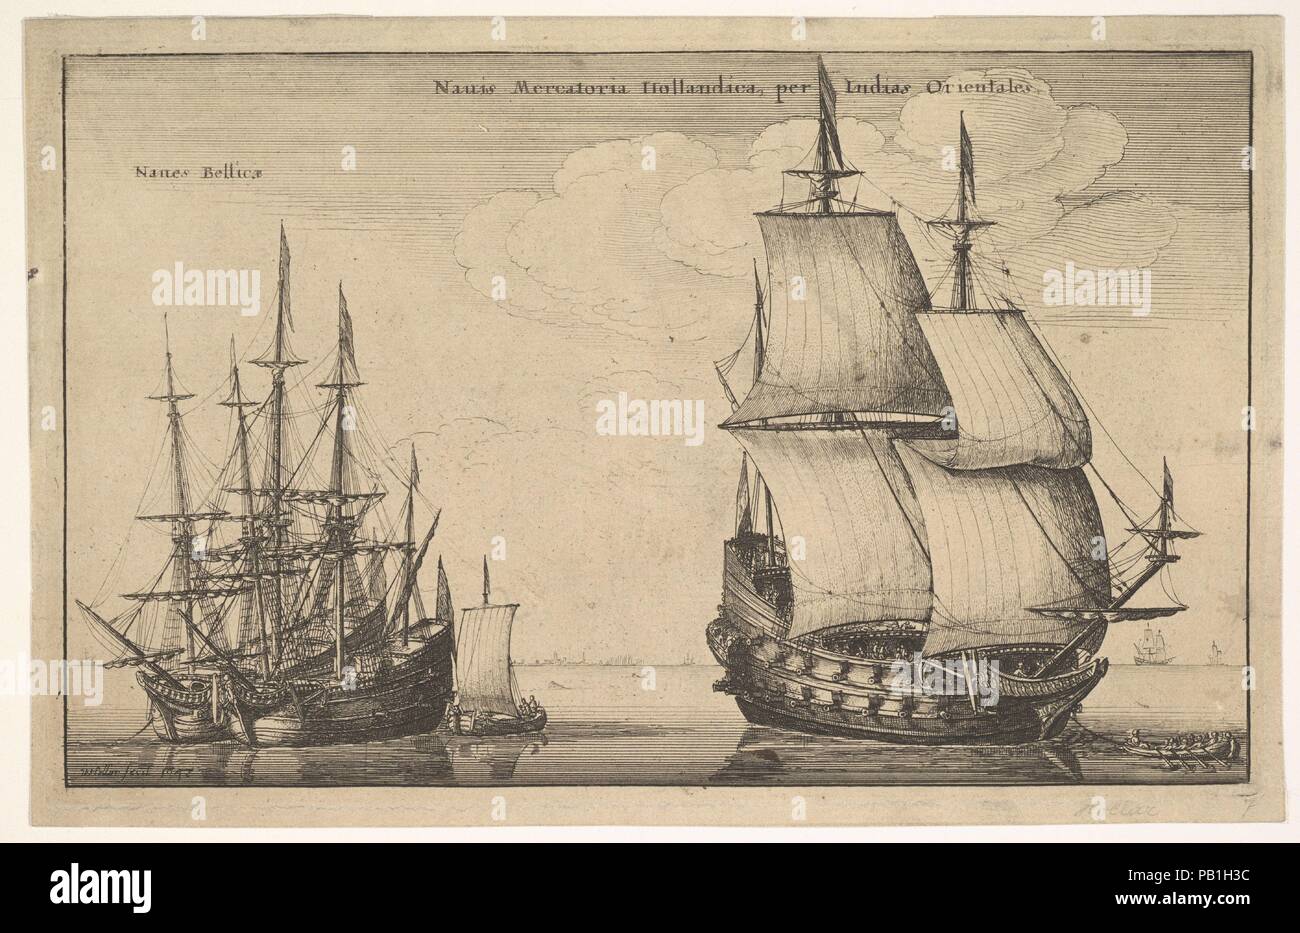 Naues Mercatoriæ Hollandicæ per Indias Occidentales (Dutch East Indiaman). Artist: Wenceslaus Hollar (Bohemian, Prague 1607-1677 London). Dimensions: Plate: 5 11/16 × 9 5/16 in. (14.5 × 23.7 cm)  Sheet: 6 1/8 × 9 1/2 in. (15.6 × 24.1 cm). Series/Portfolio: Navium Variæ Figuræ et Formæ (Dutch Ships). Date: 1647.  Dutch East Indiaman; three-masted ship with two banks of guns towed by small boat to right; two three-masted ships at anchor side by side and small boat to left; town on the coast seen in distance. Museum: Metropolitan Museum of Art, New York, USA. Stock Photo